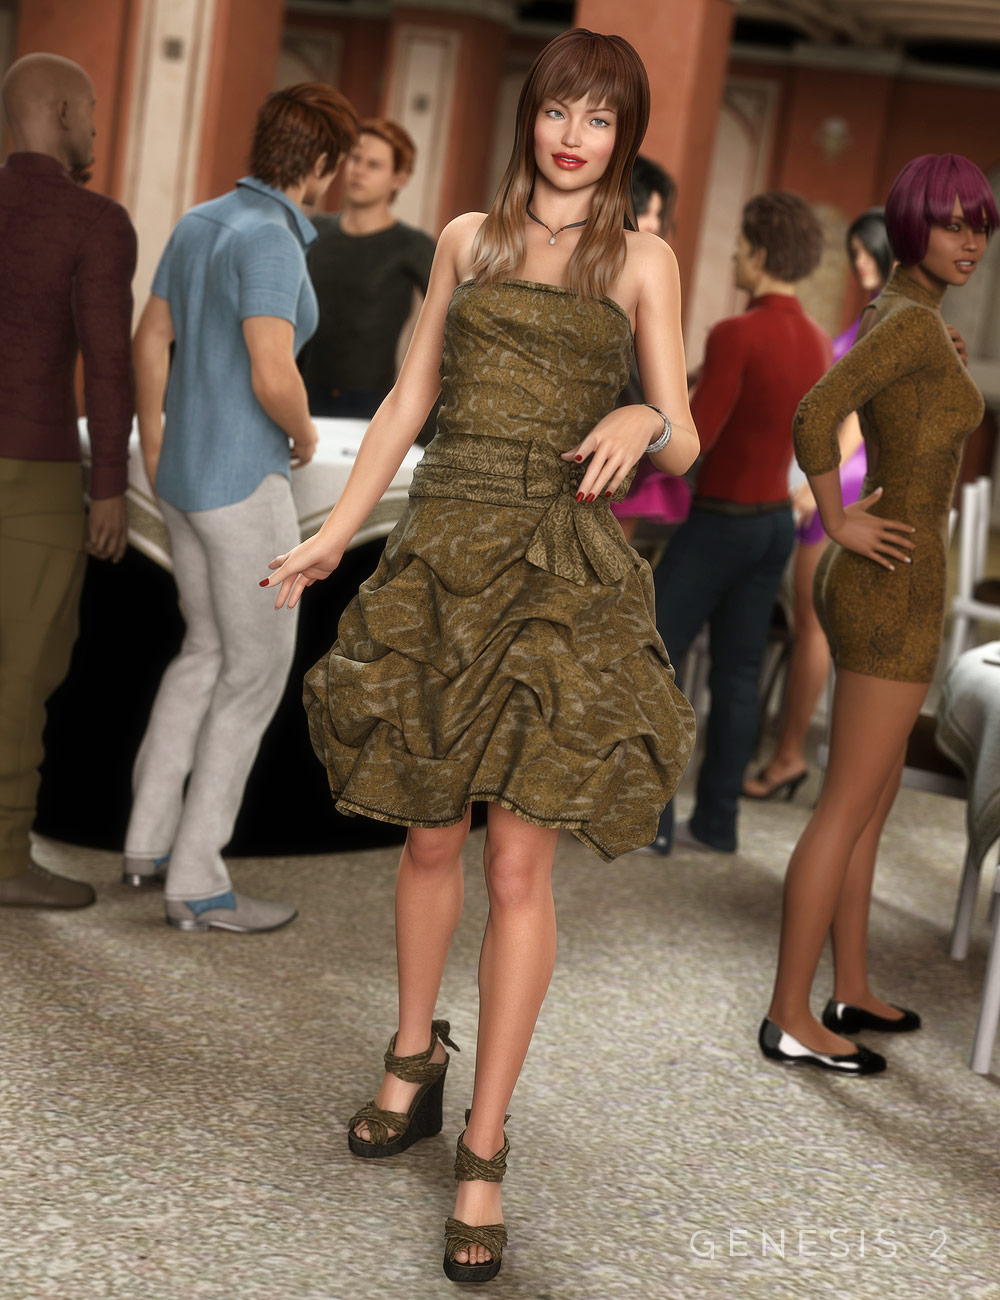 Party PickUp Dress Textures by: Sarsa, 3D Models by Daz 3D